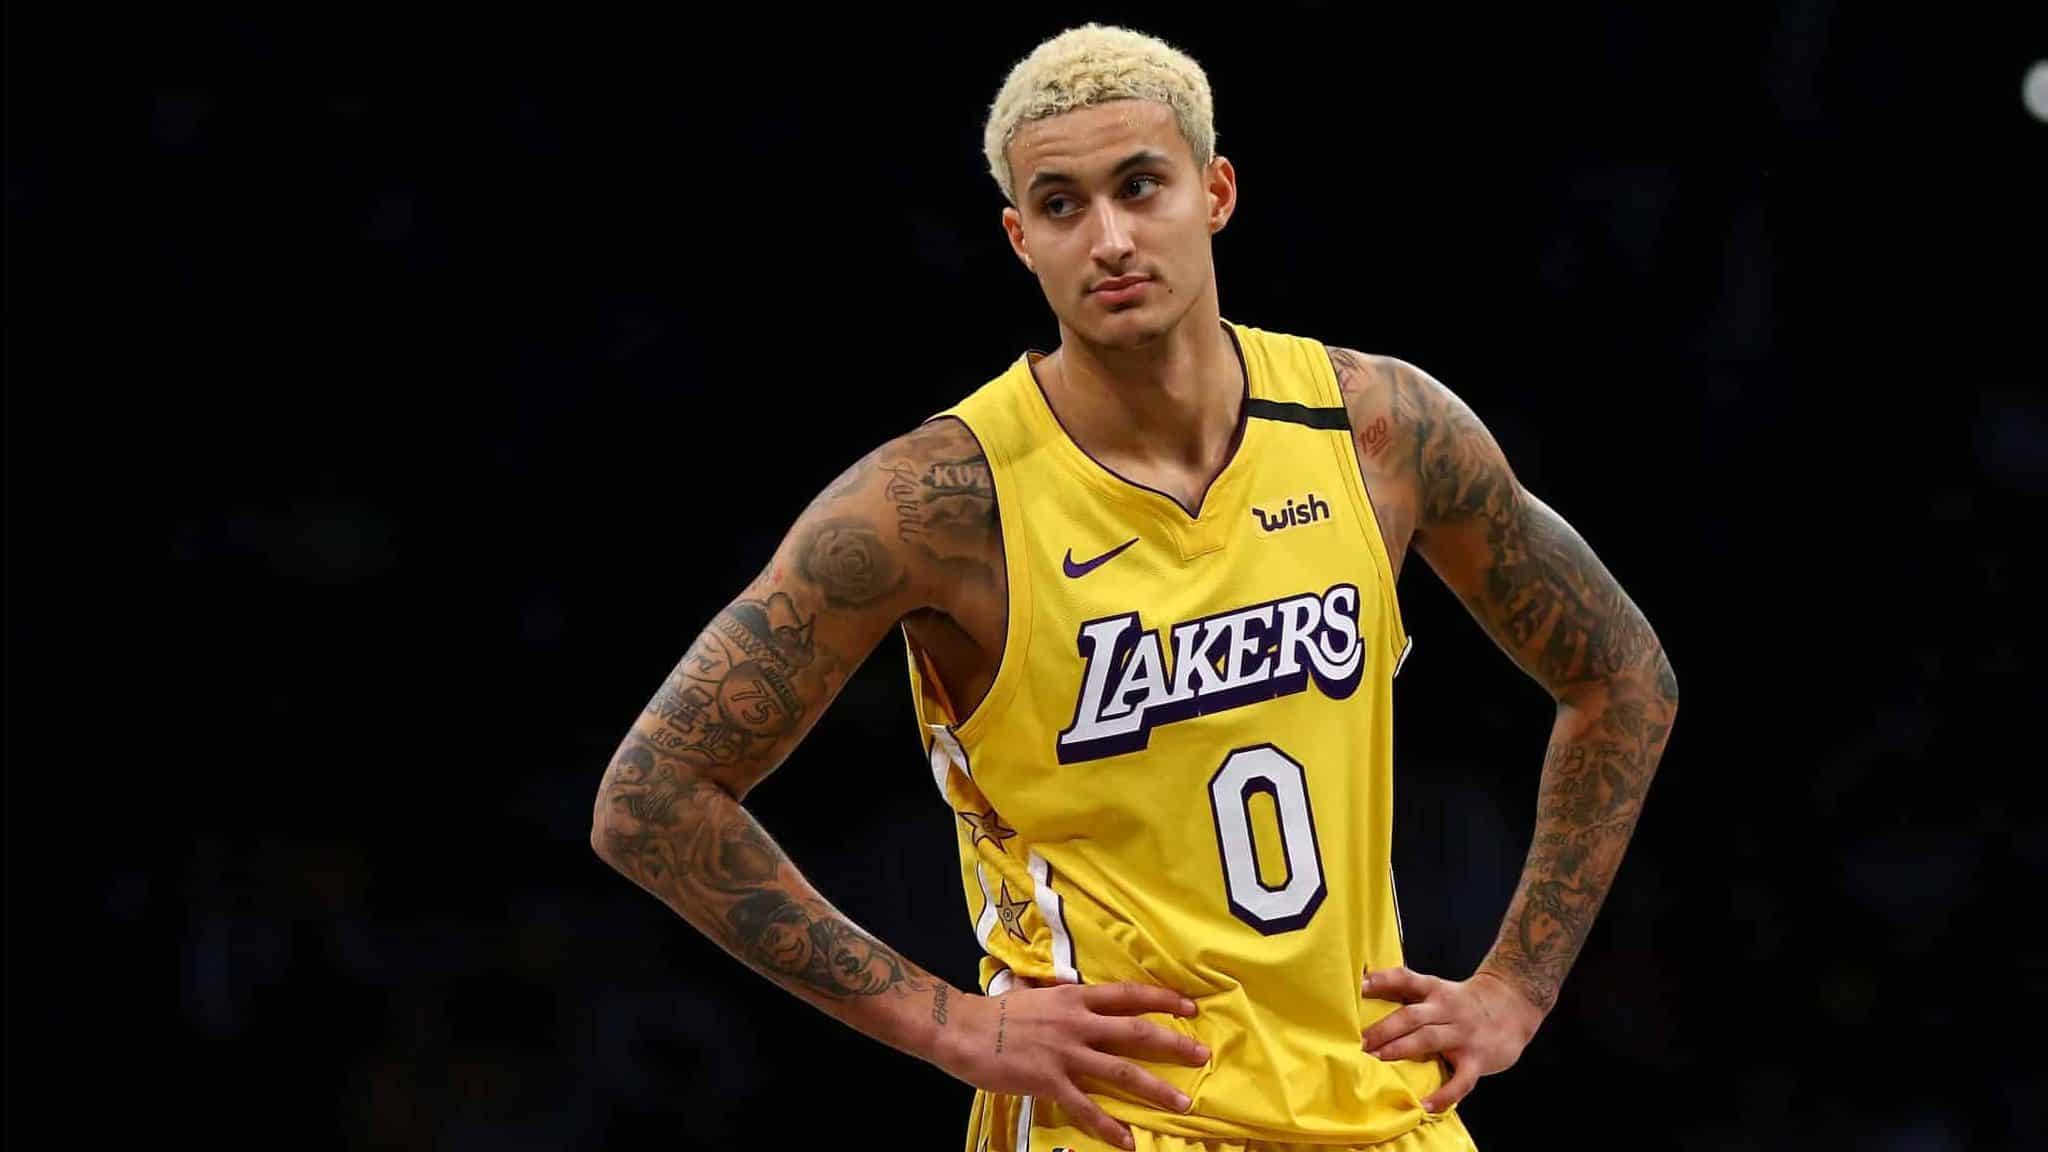 NEW YORK, NEW YORK - JANUARY 23: Kyle Kuzma #0 of the Los Angeles Lakers in action against the Brooklyn Nets at Barclays Center on January 23, 2020 in New York City. NOTE TO USER: User expressly acknowledges and agrees that, by downloading and or using this photograph, User is consenting to the terms and conditions of the Getty Images License Agreement.